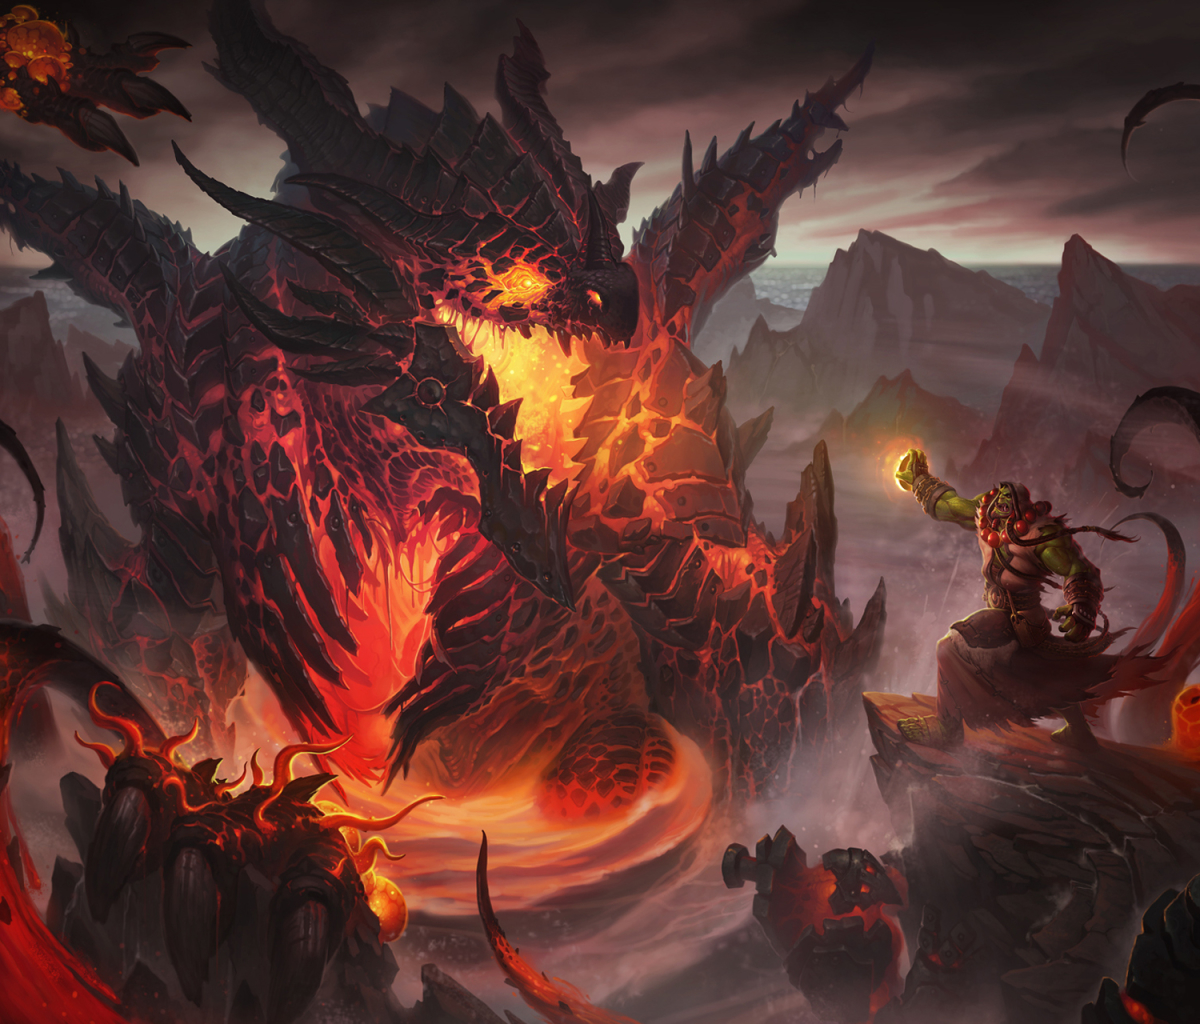 video game, world of warcraft, deathwing (world of warcraft), thrall (world of warcraft), dragon, warcraft High Definition image